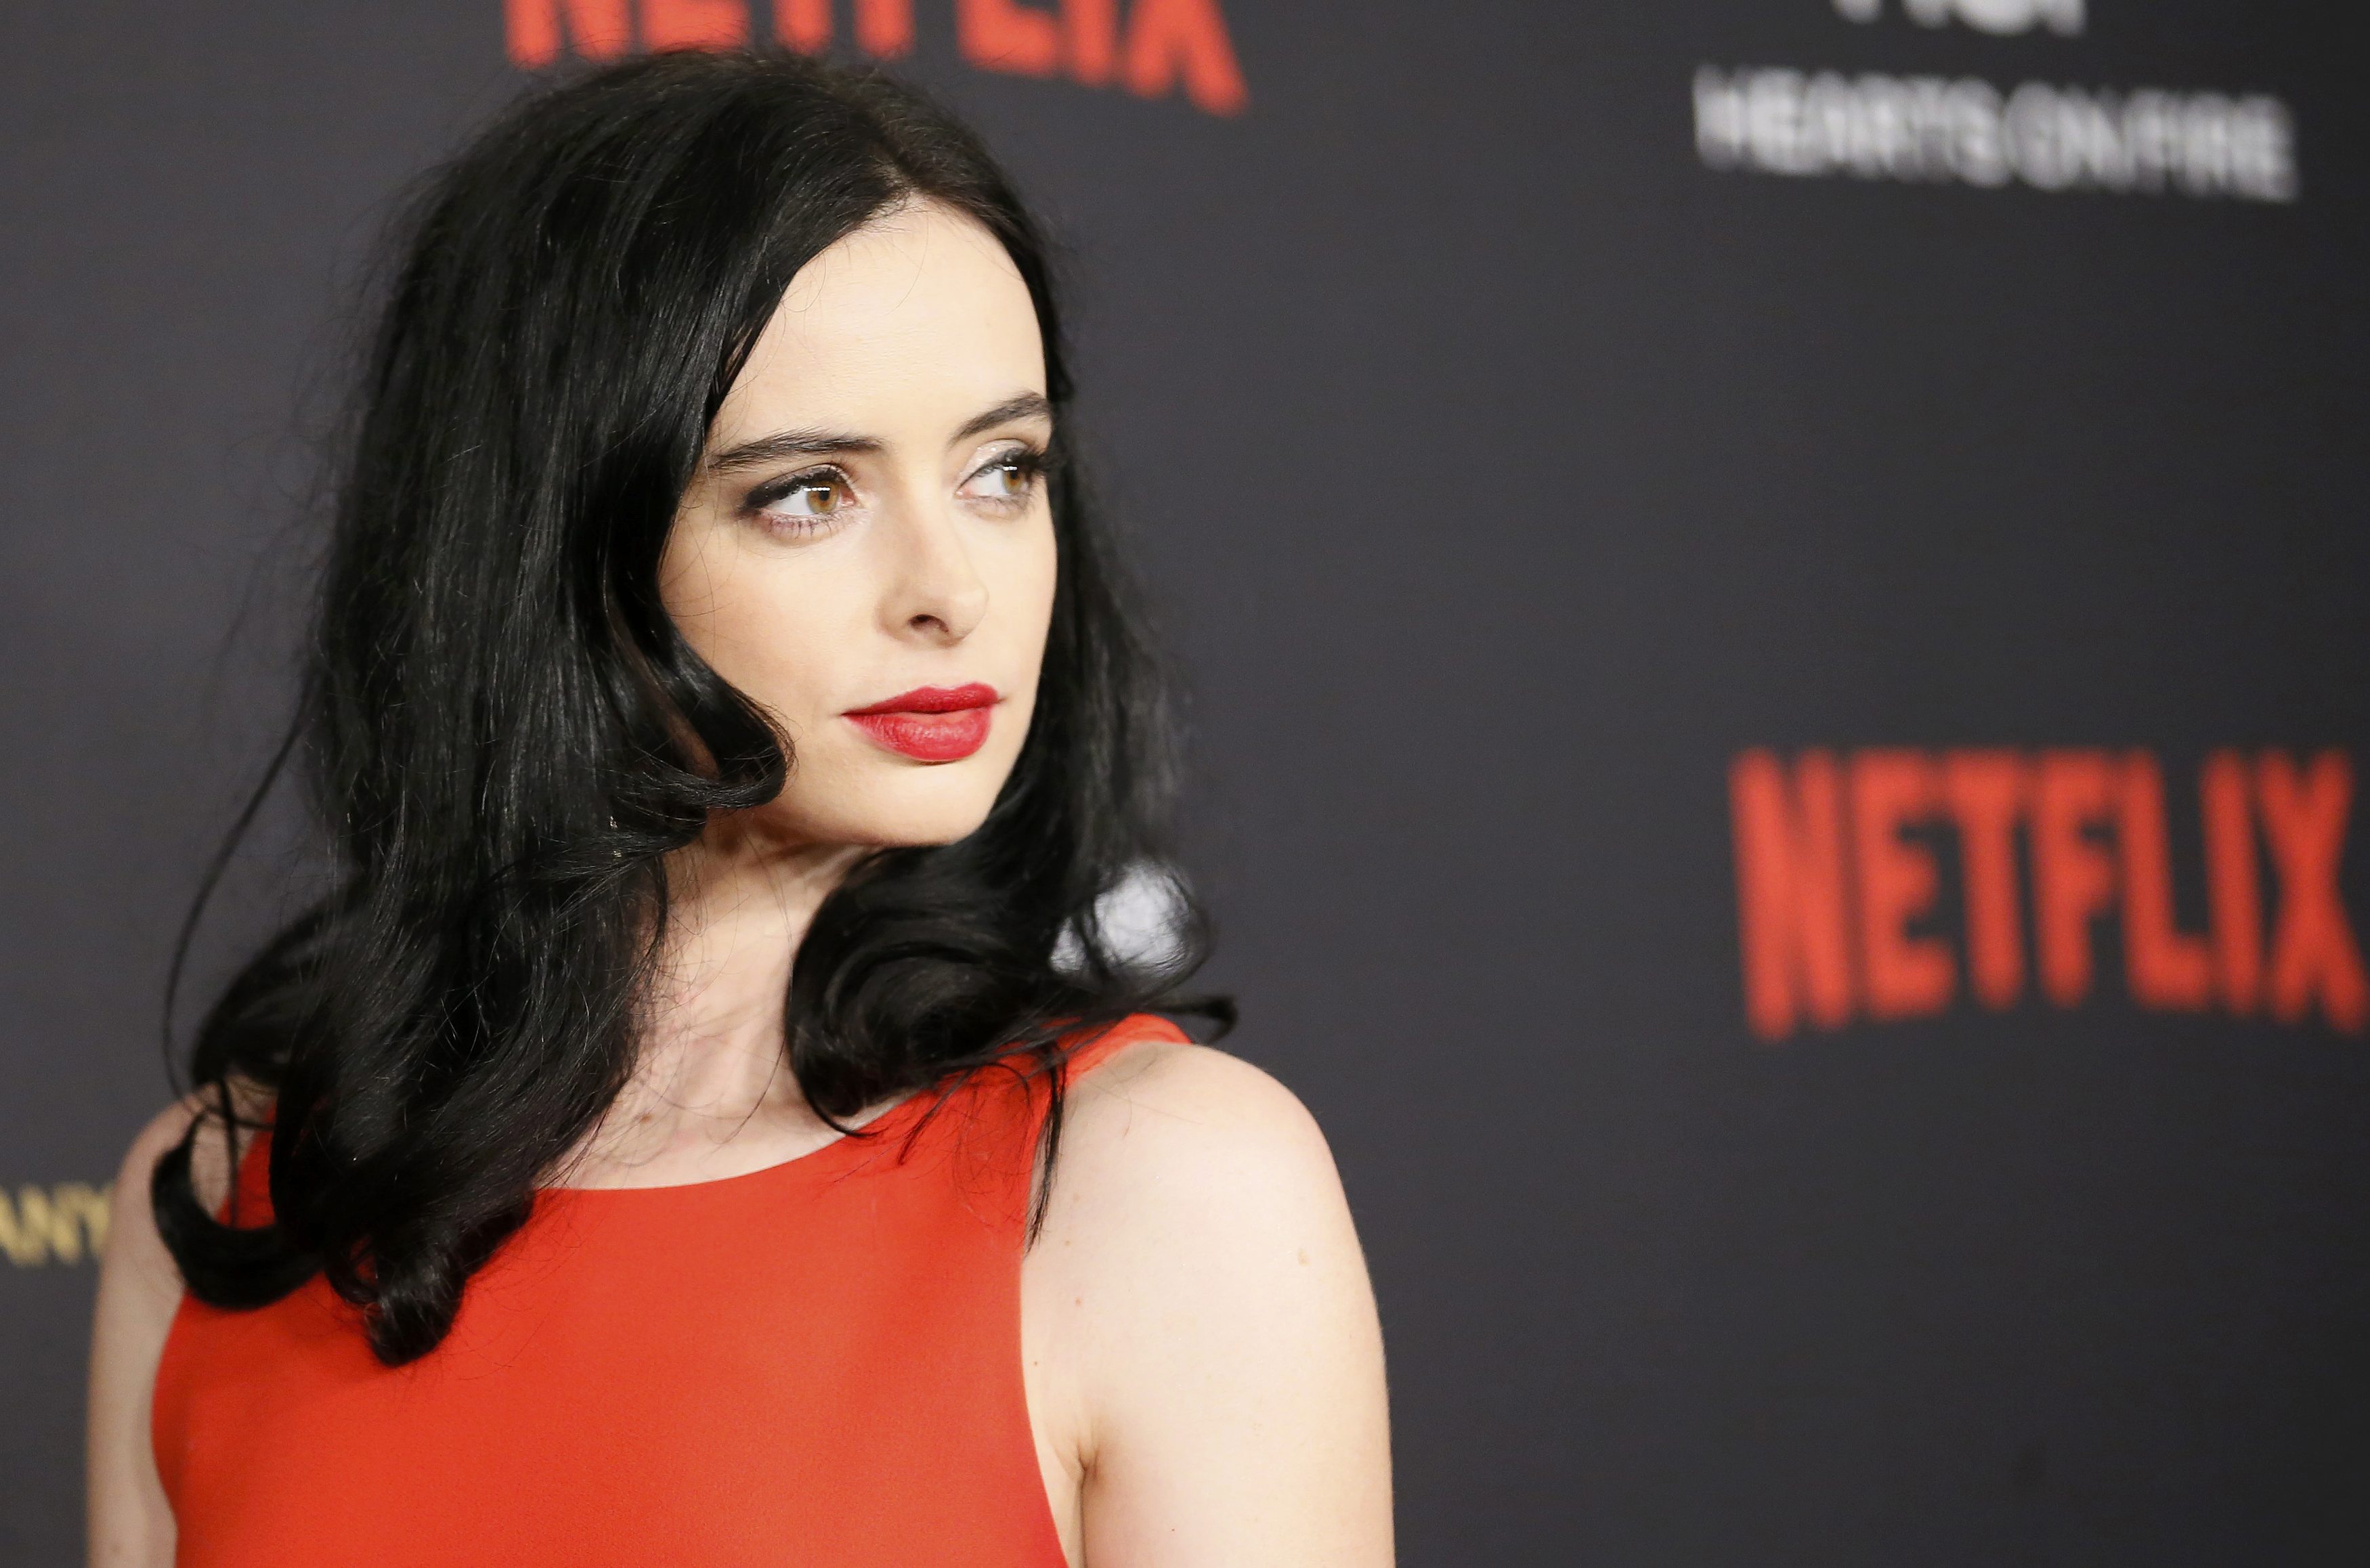 Actress Krysten Ritter arrives at The Weinstein Company & Netflix Golden Globe After Party in Beverly Hills, California January 10, 2016. REUTERS/Danny Moloshok